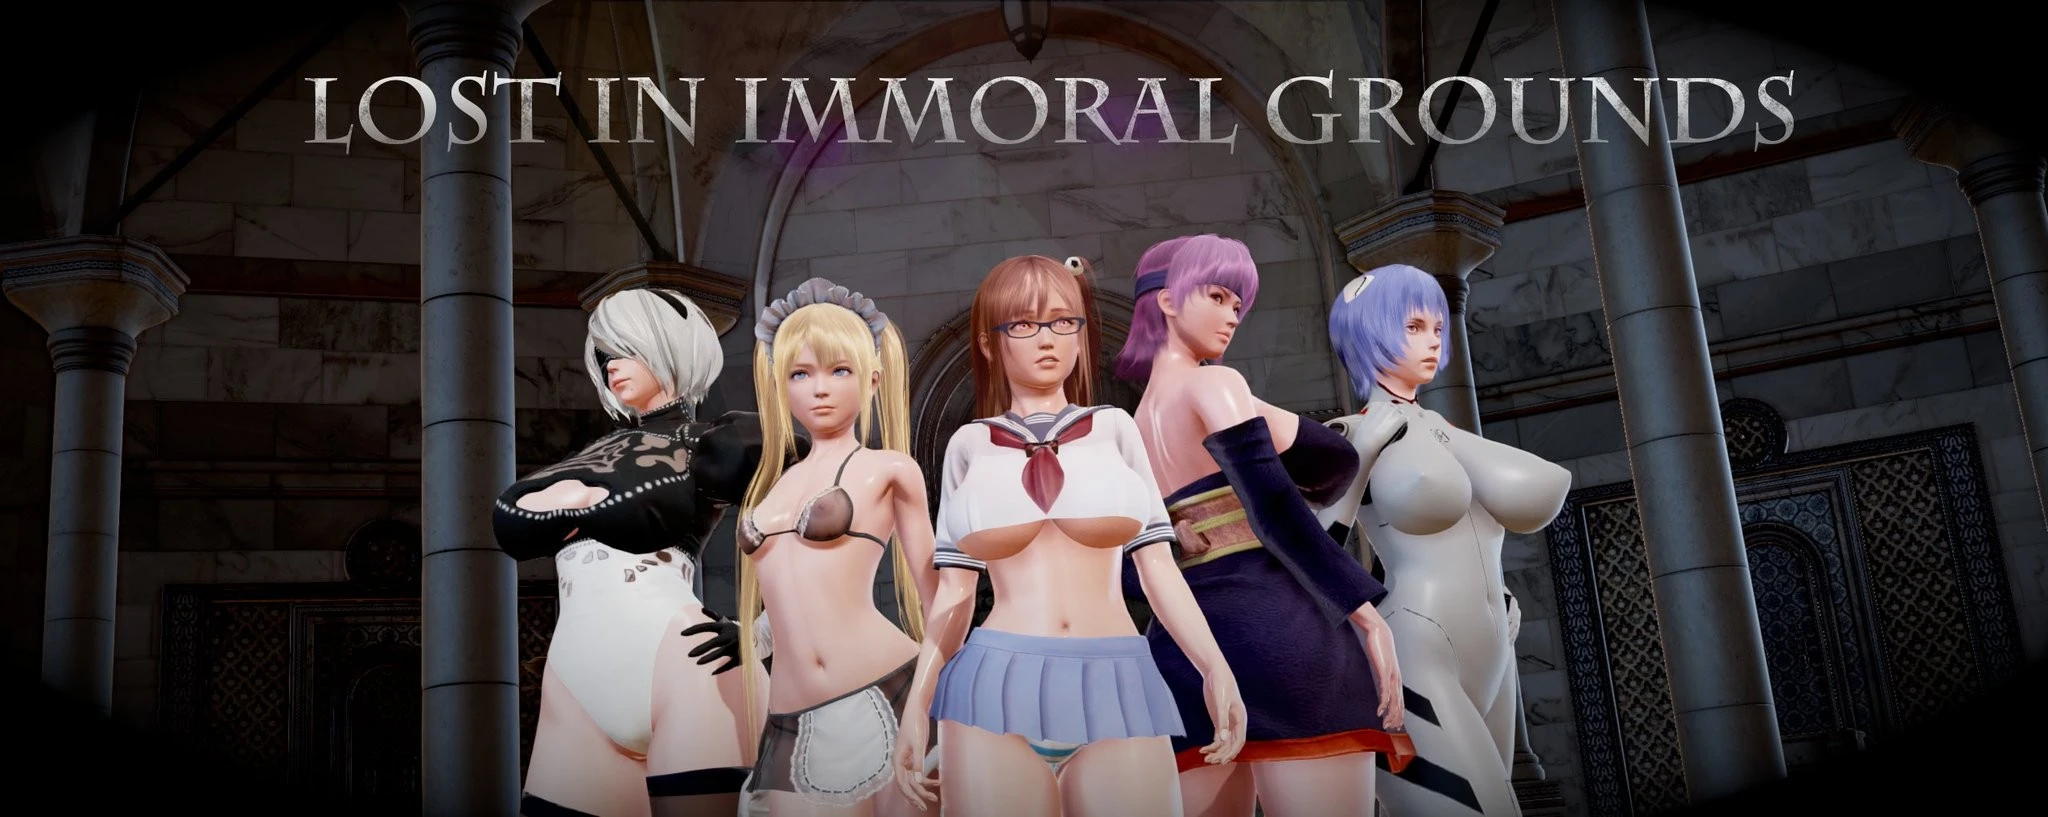 Lost in Immoral Grounds [v0.52] main image